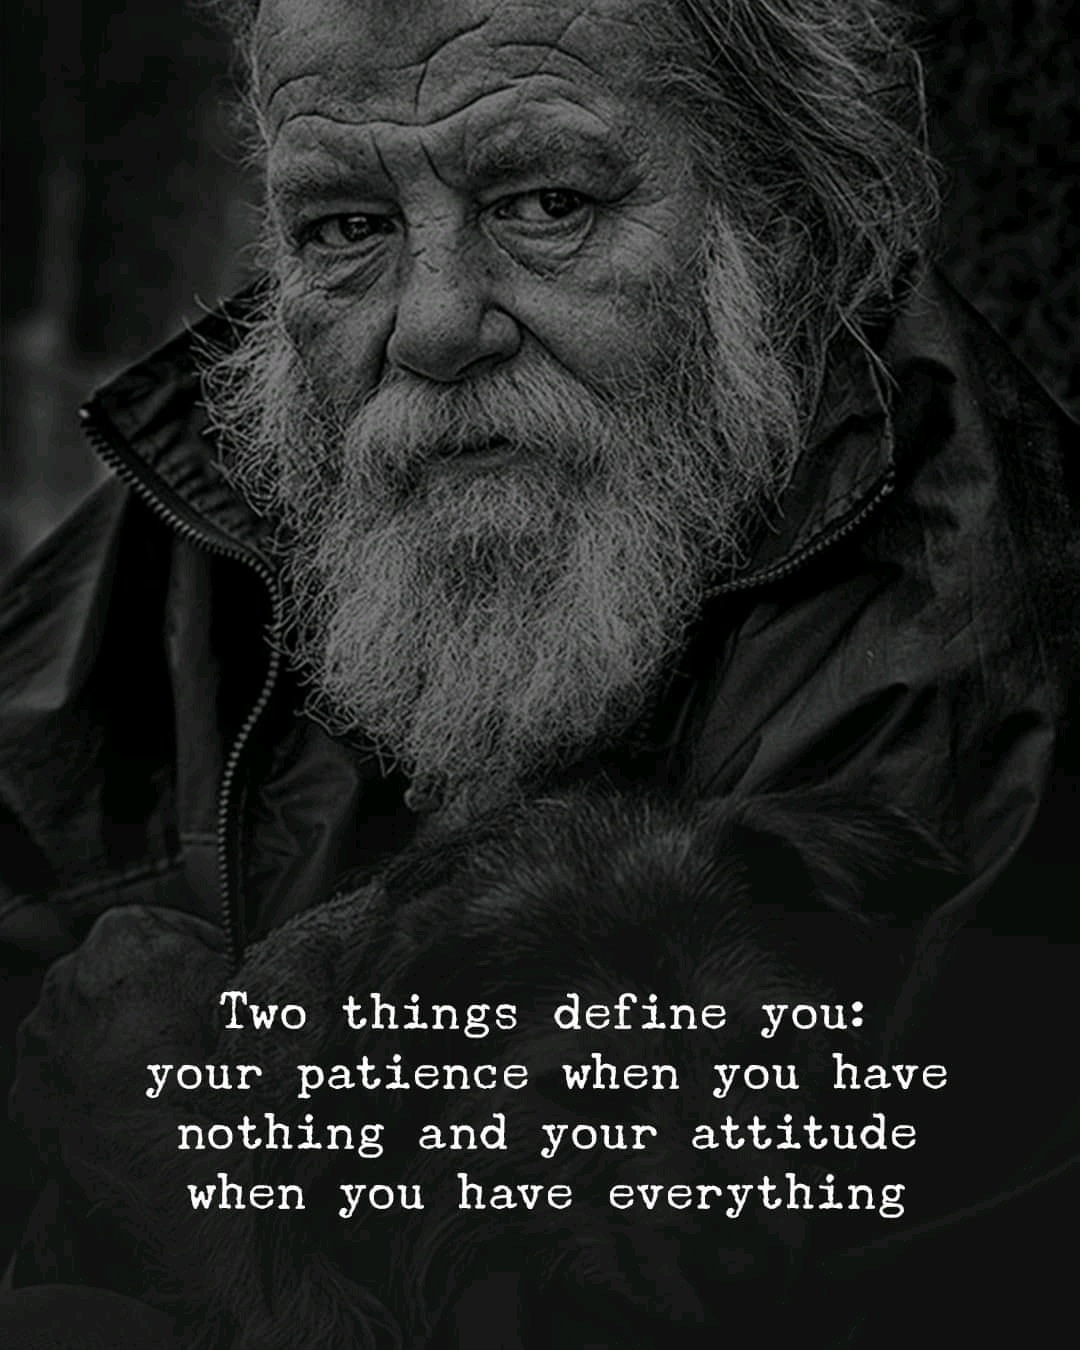 Two things define you: Your patience when you have nothing and your attitude when you have everything.